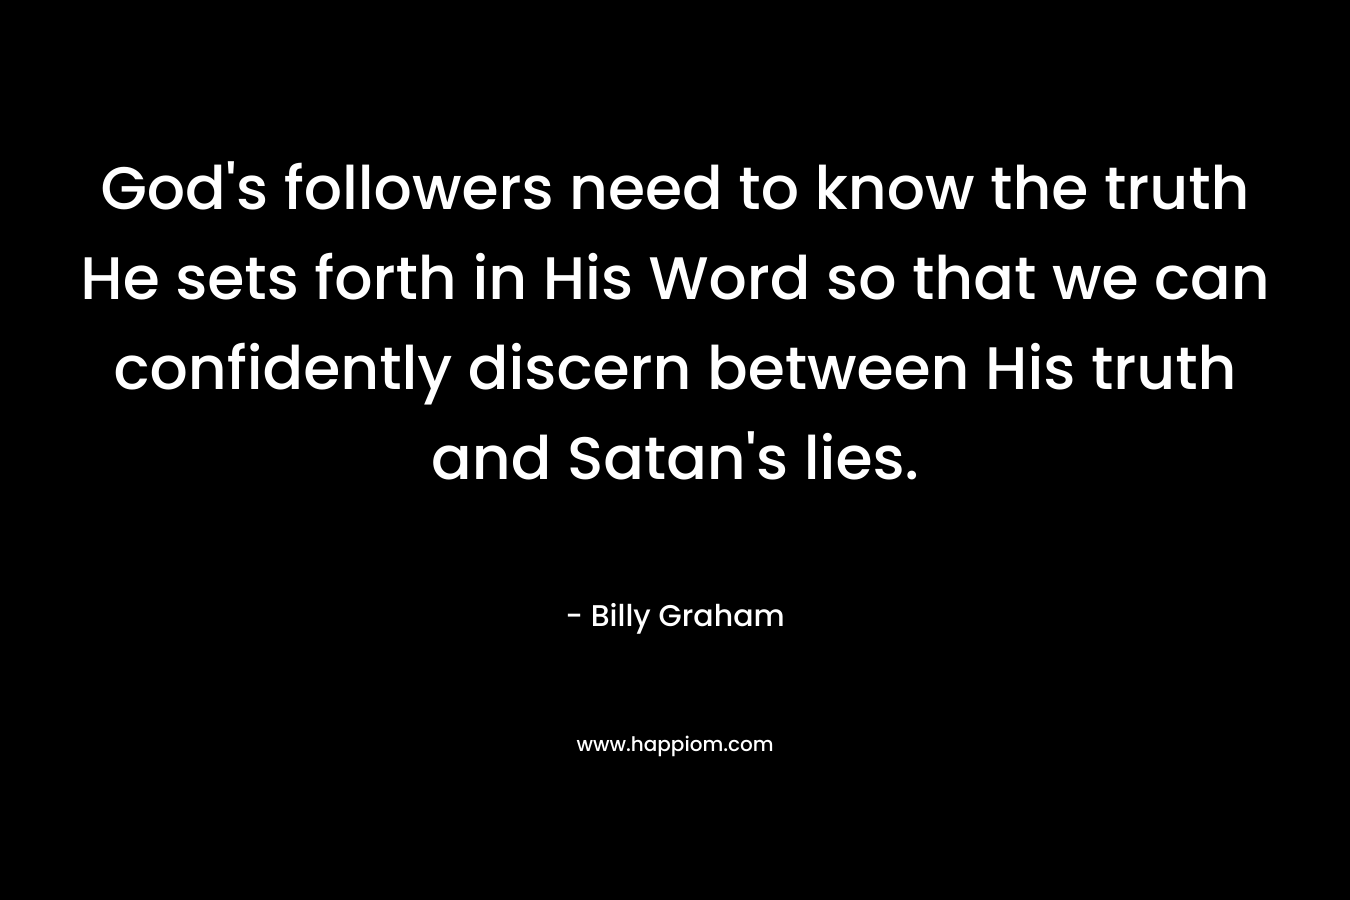 God's followers need to know the truth He sets forth in His Word so that we can confidently discern between His truth and Satan's lies.